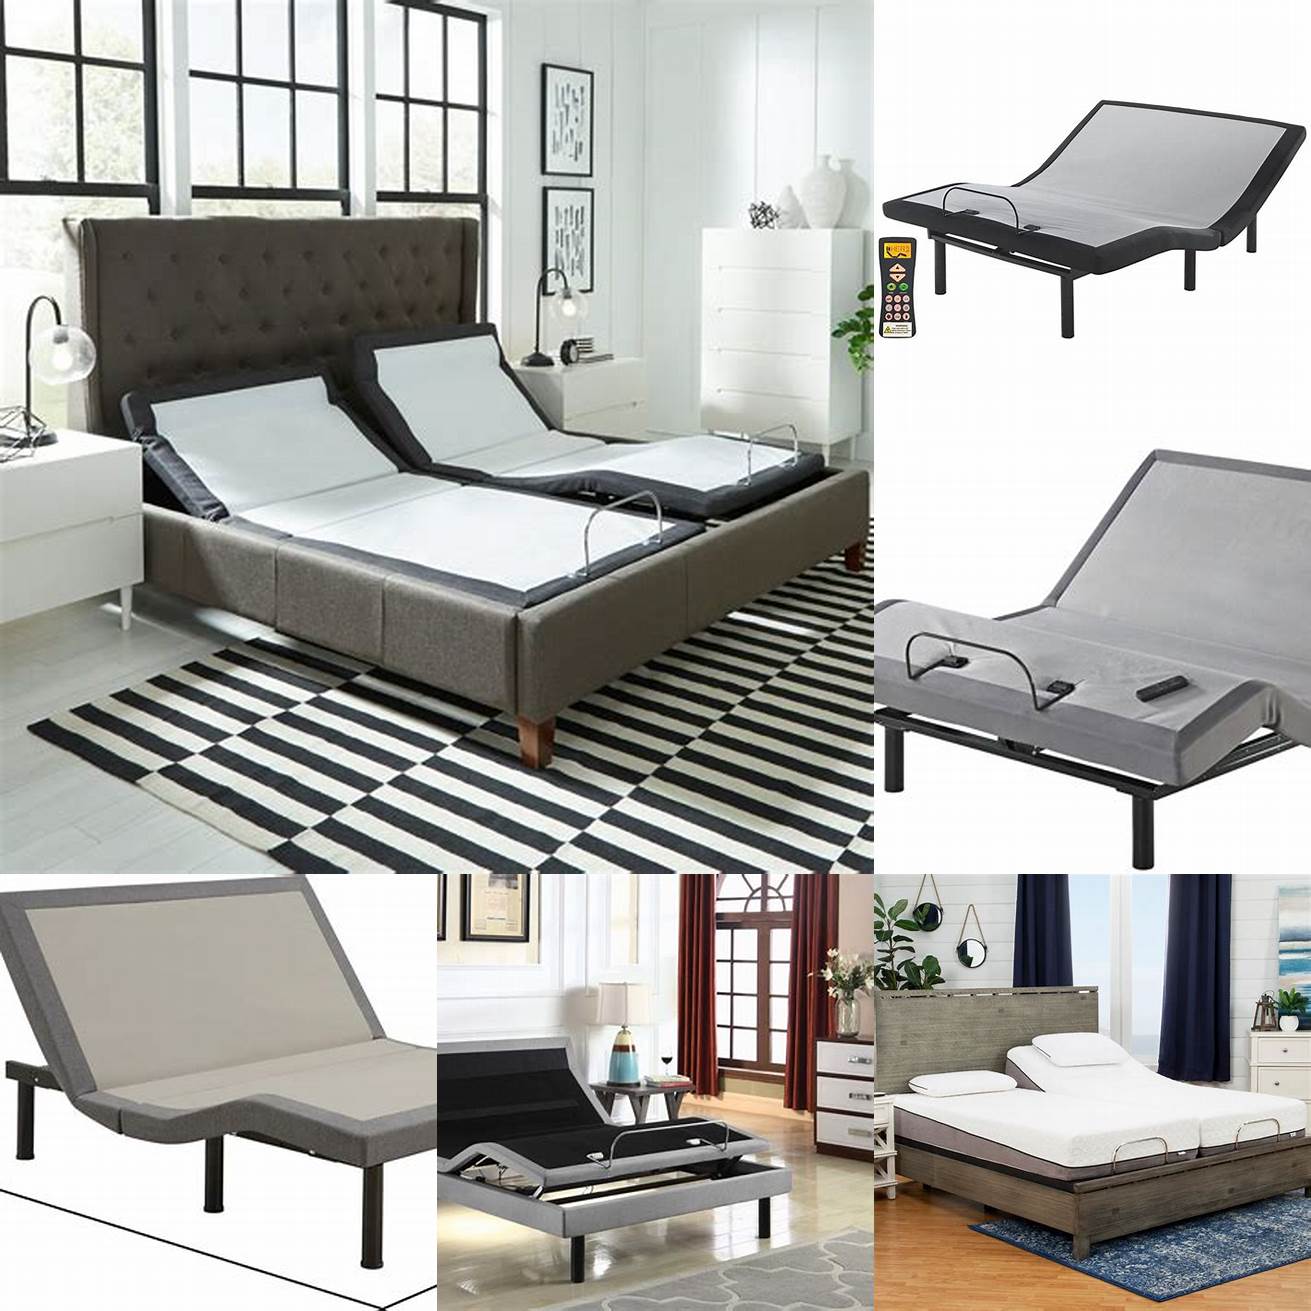 Adjustable California King Bed This type of bed allows you to adjust the head and foot of the bed to your desired position making it ideal for people who suffer from back pain or other medical conditions